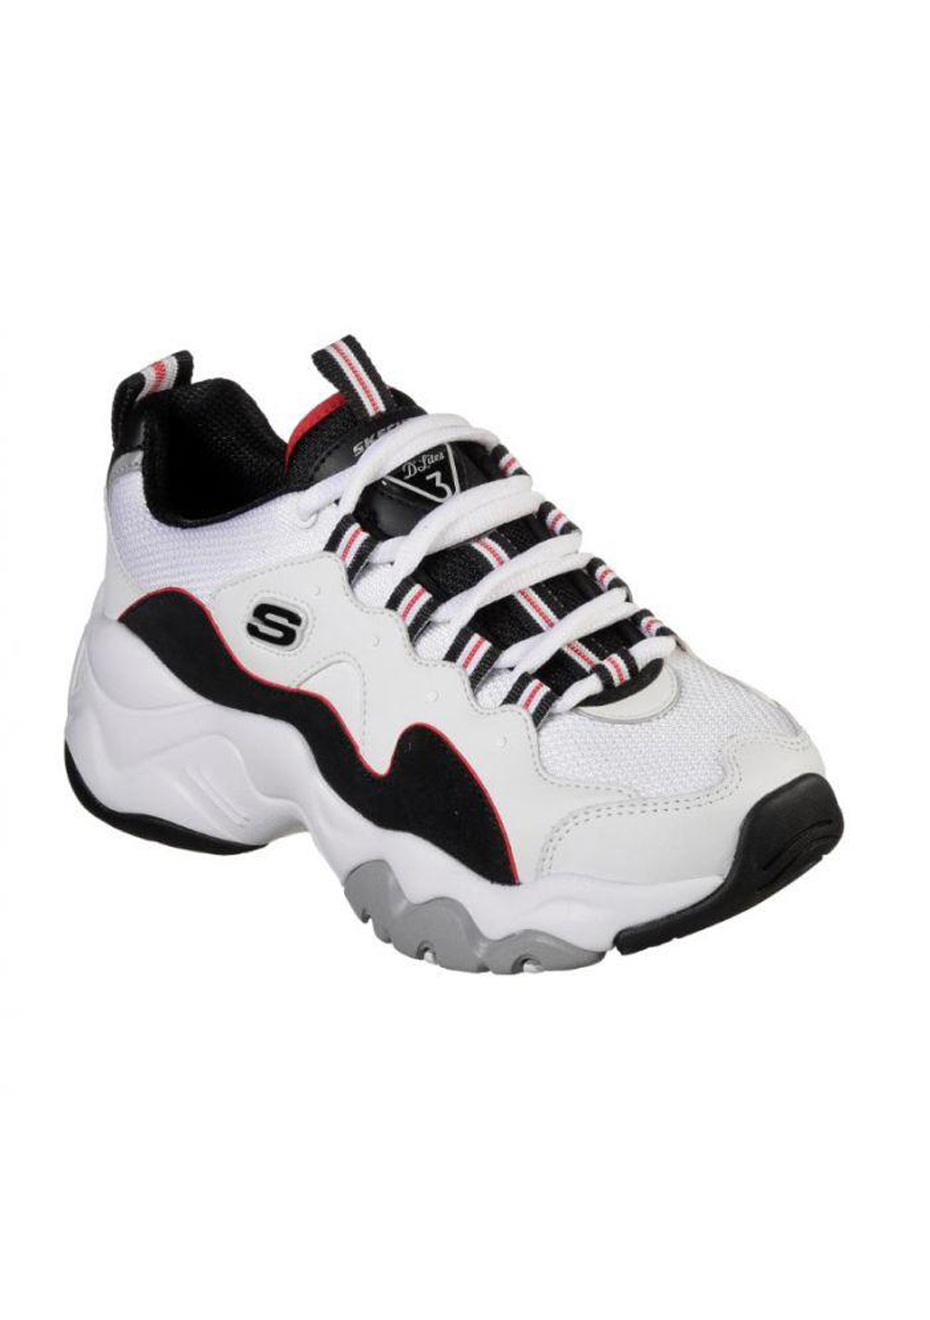 new skechers shoes for women